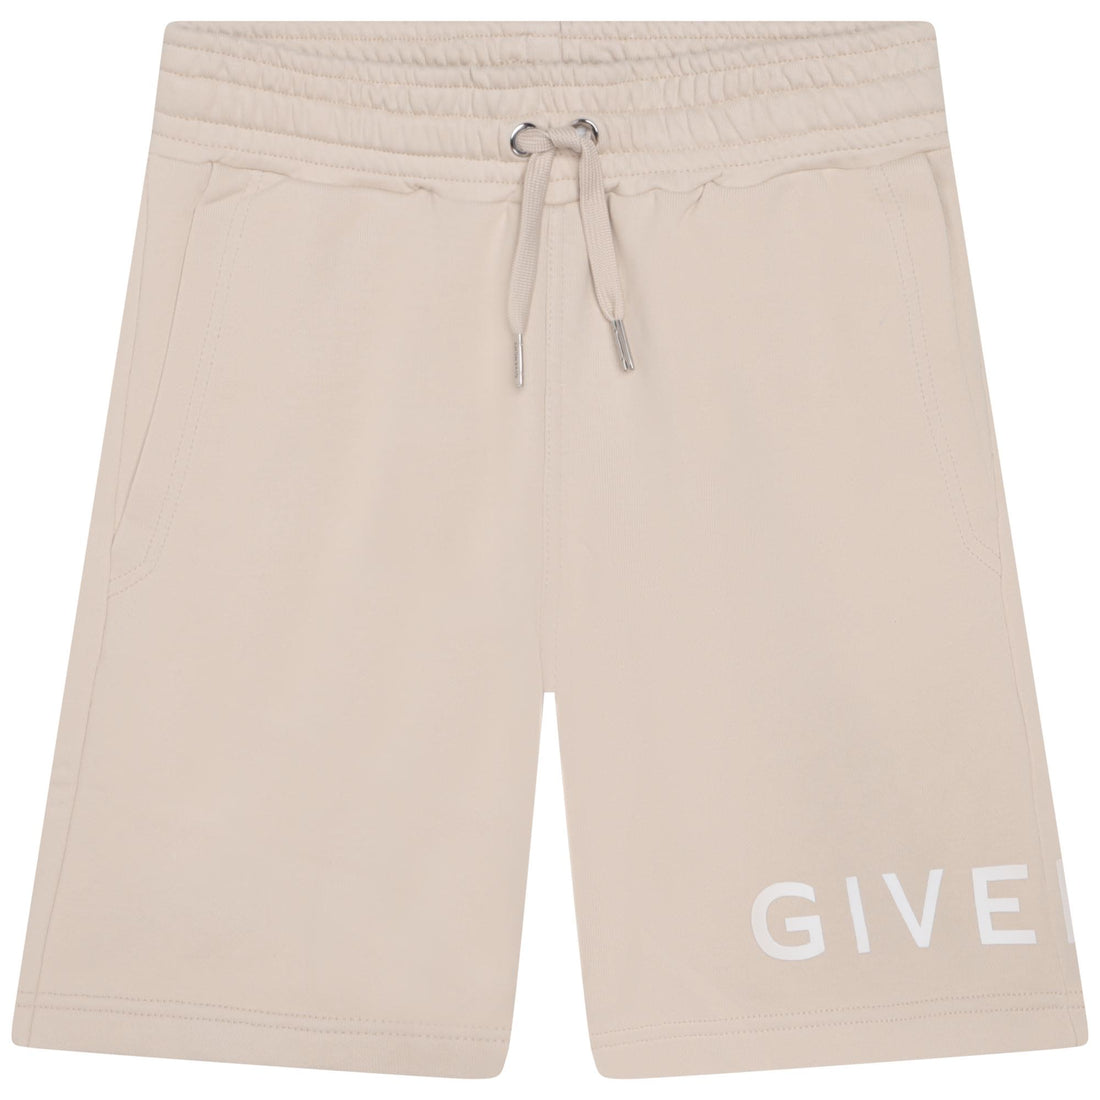 Givenchy Short Style: H24210